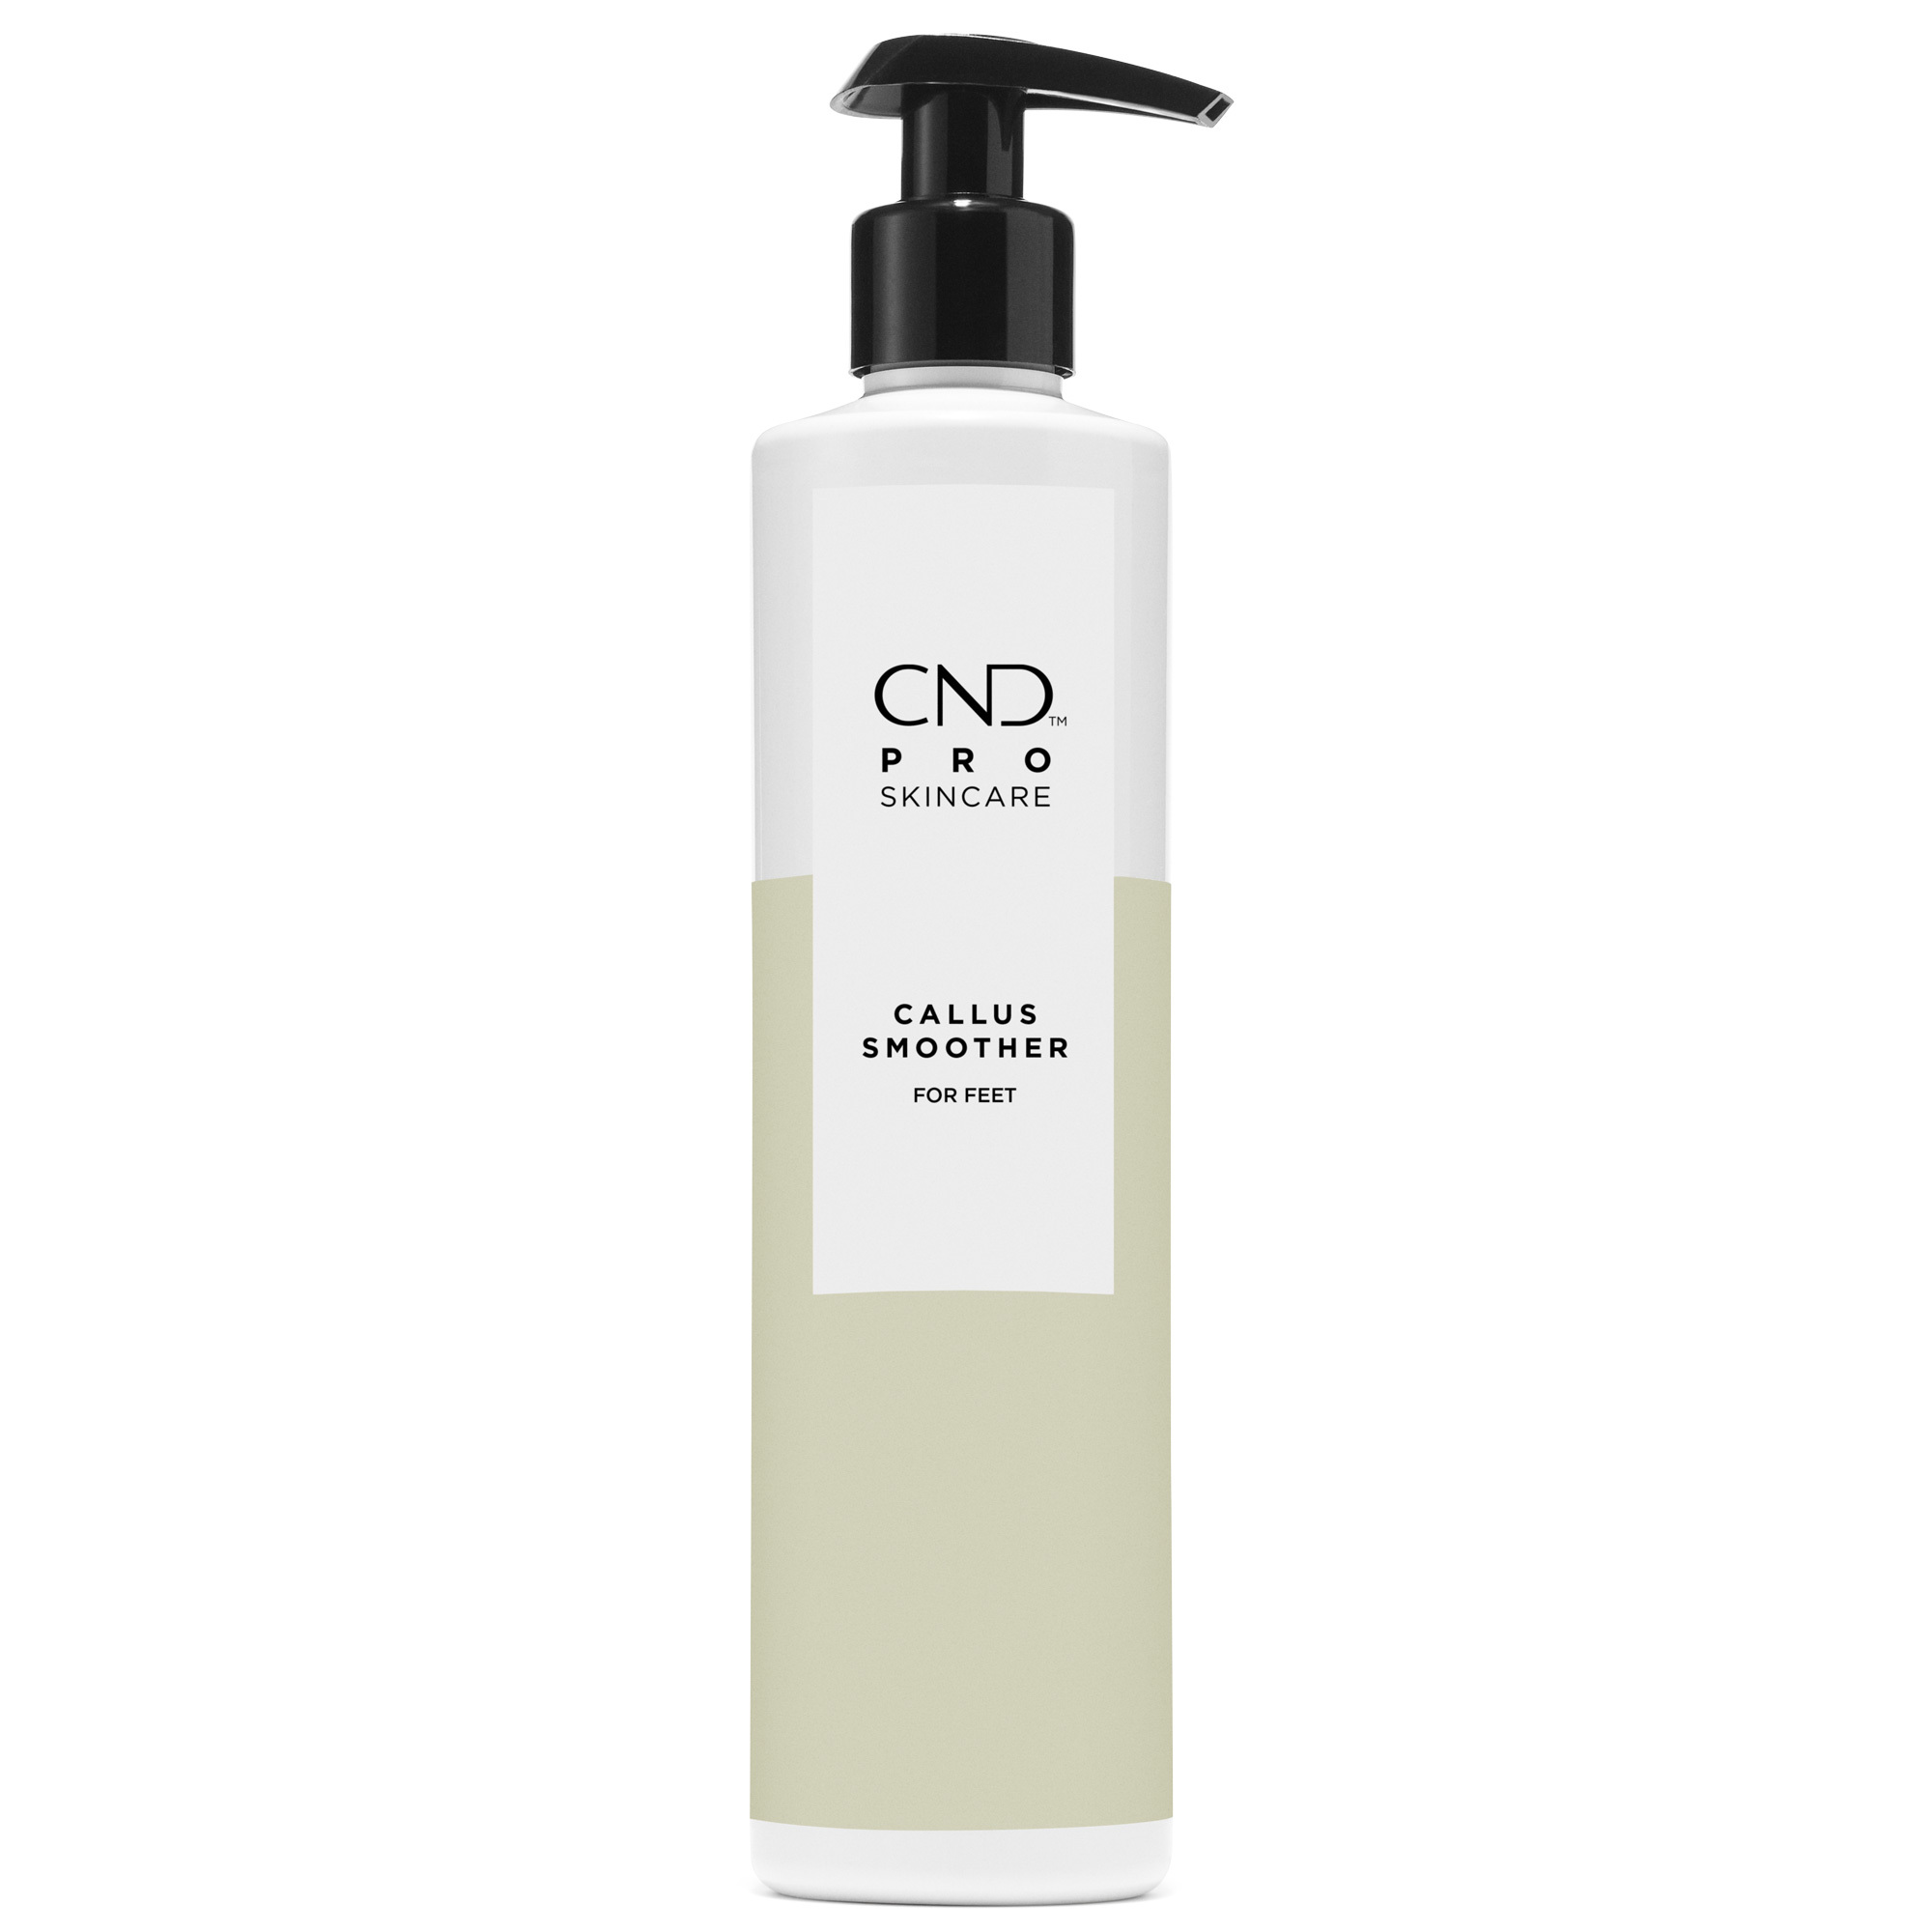 CND Pro SkinCare Callus Smoother (for feet)